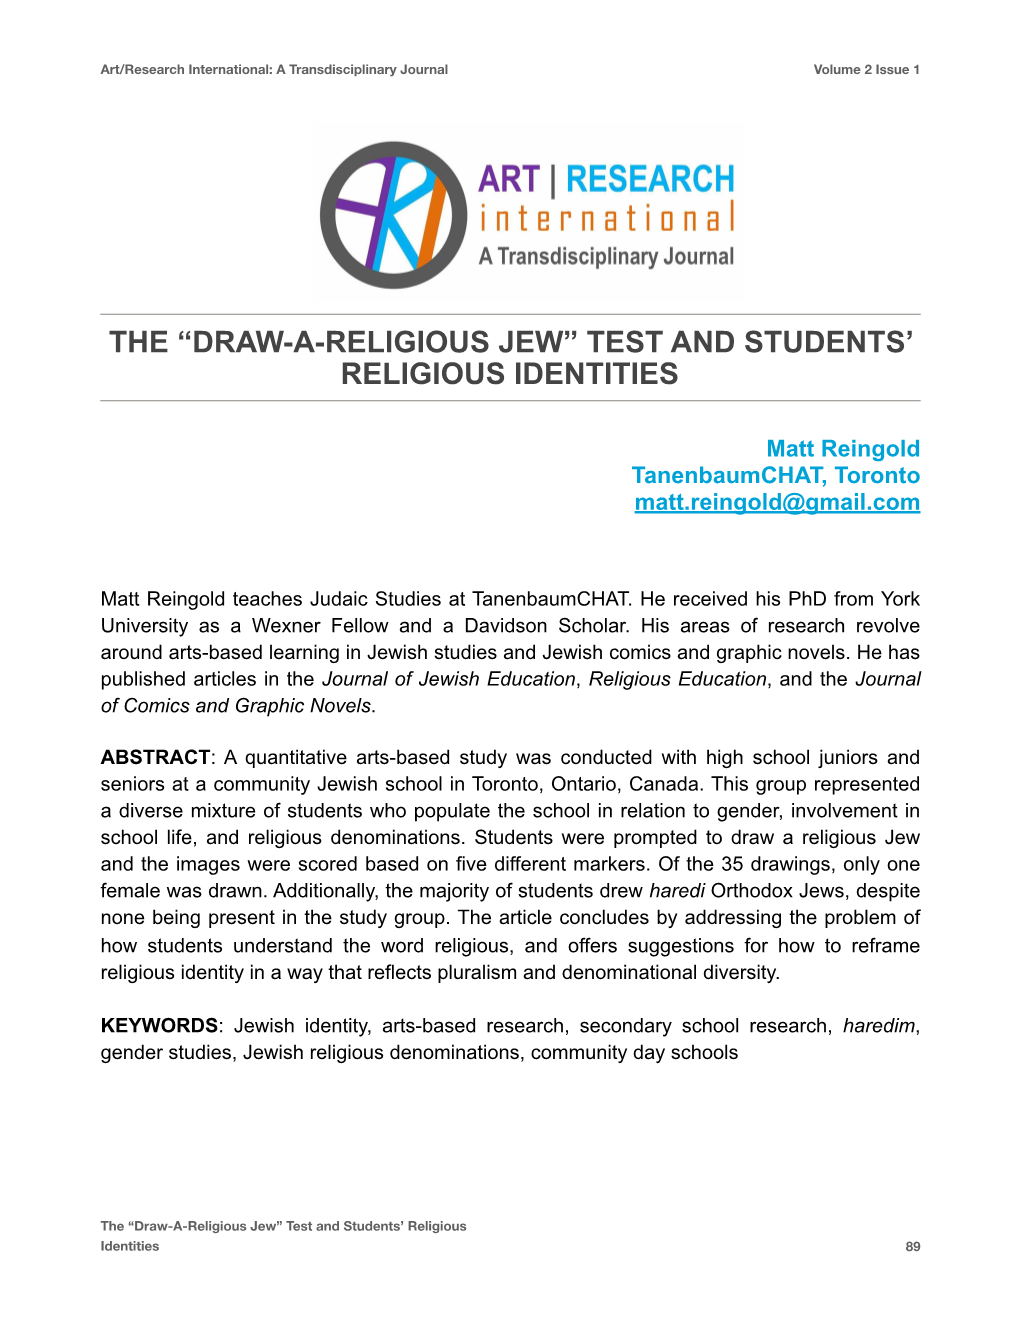 The “Draw-A-Religious Jew” Test and Students' Religious Identities